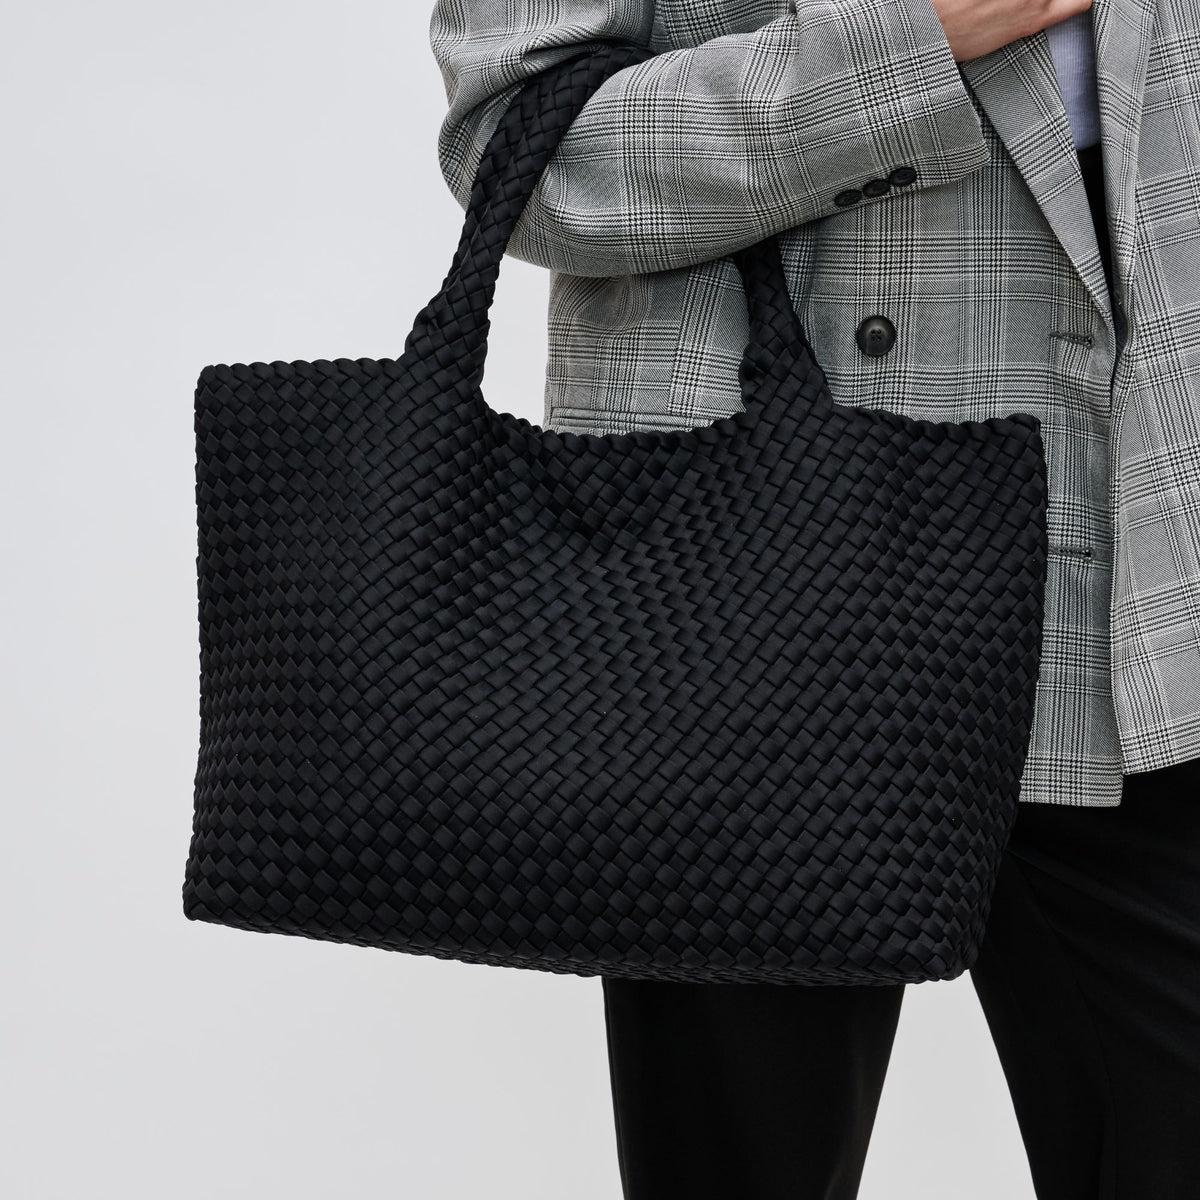 Woman wearing Black Sol and Selene Sky's The Limit - Large Tote 841764107822 View 1 | Black